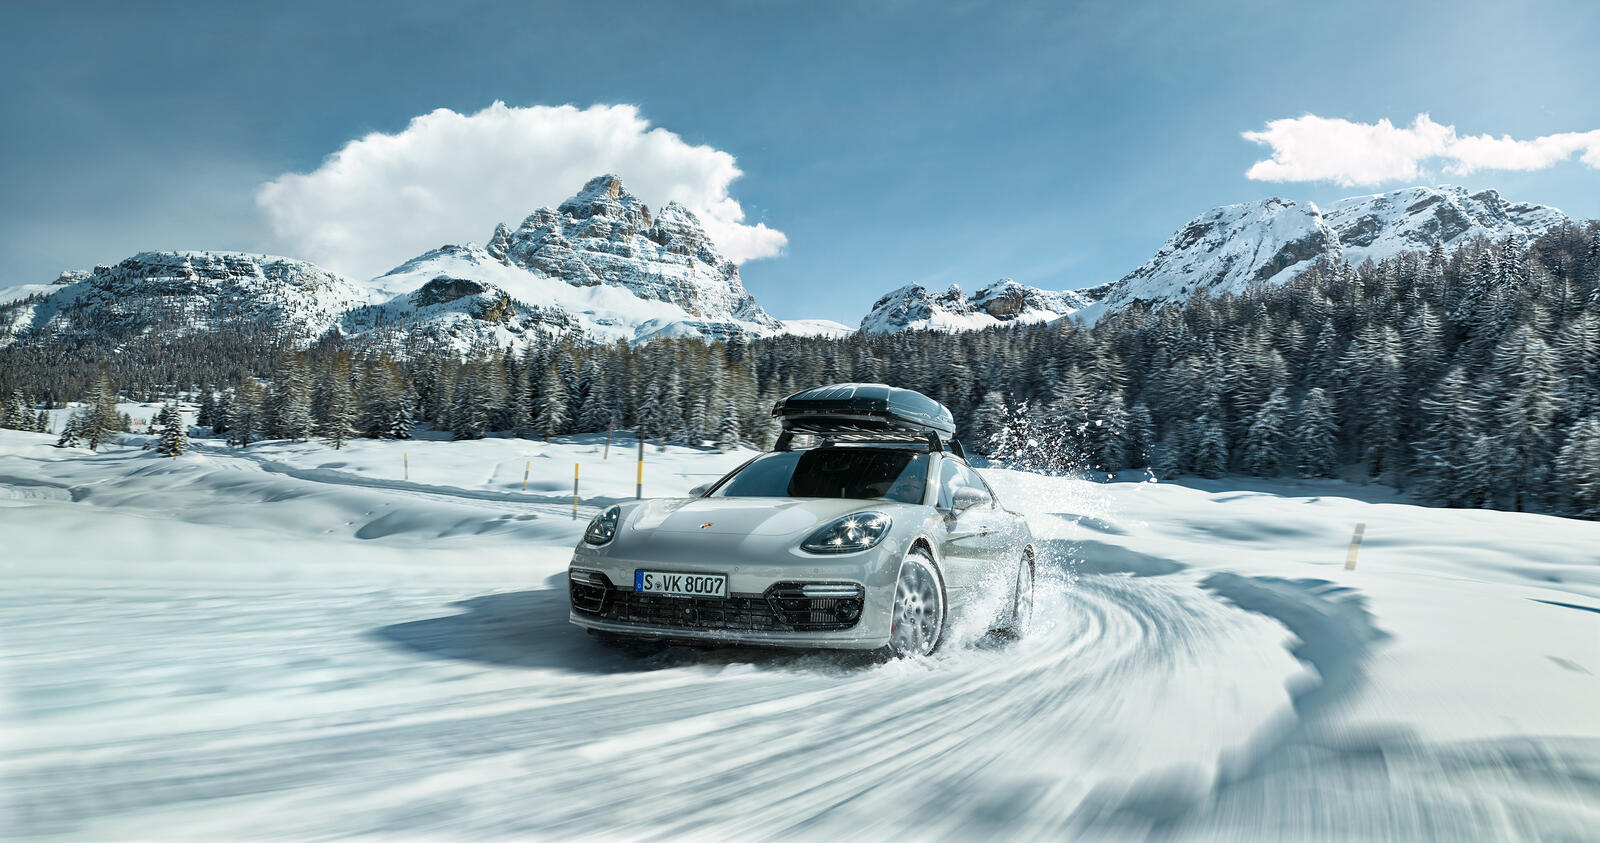 Wallpapers Porsche snow trail riding in the snow on the desktop